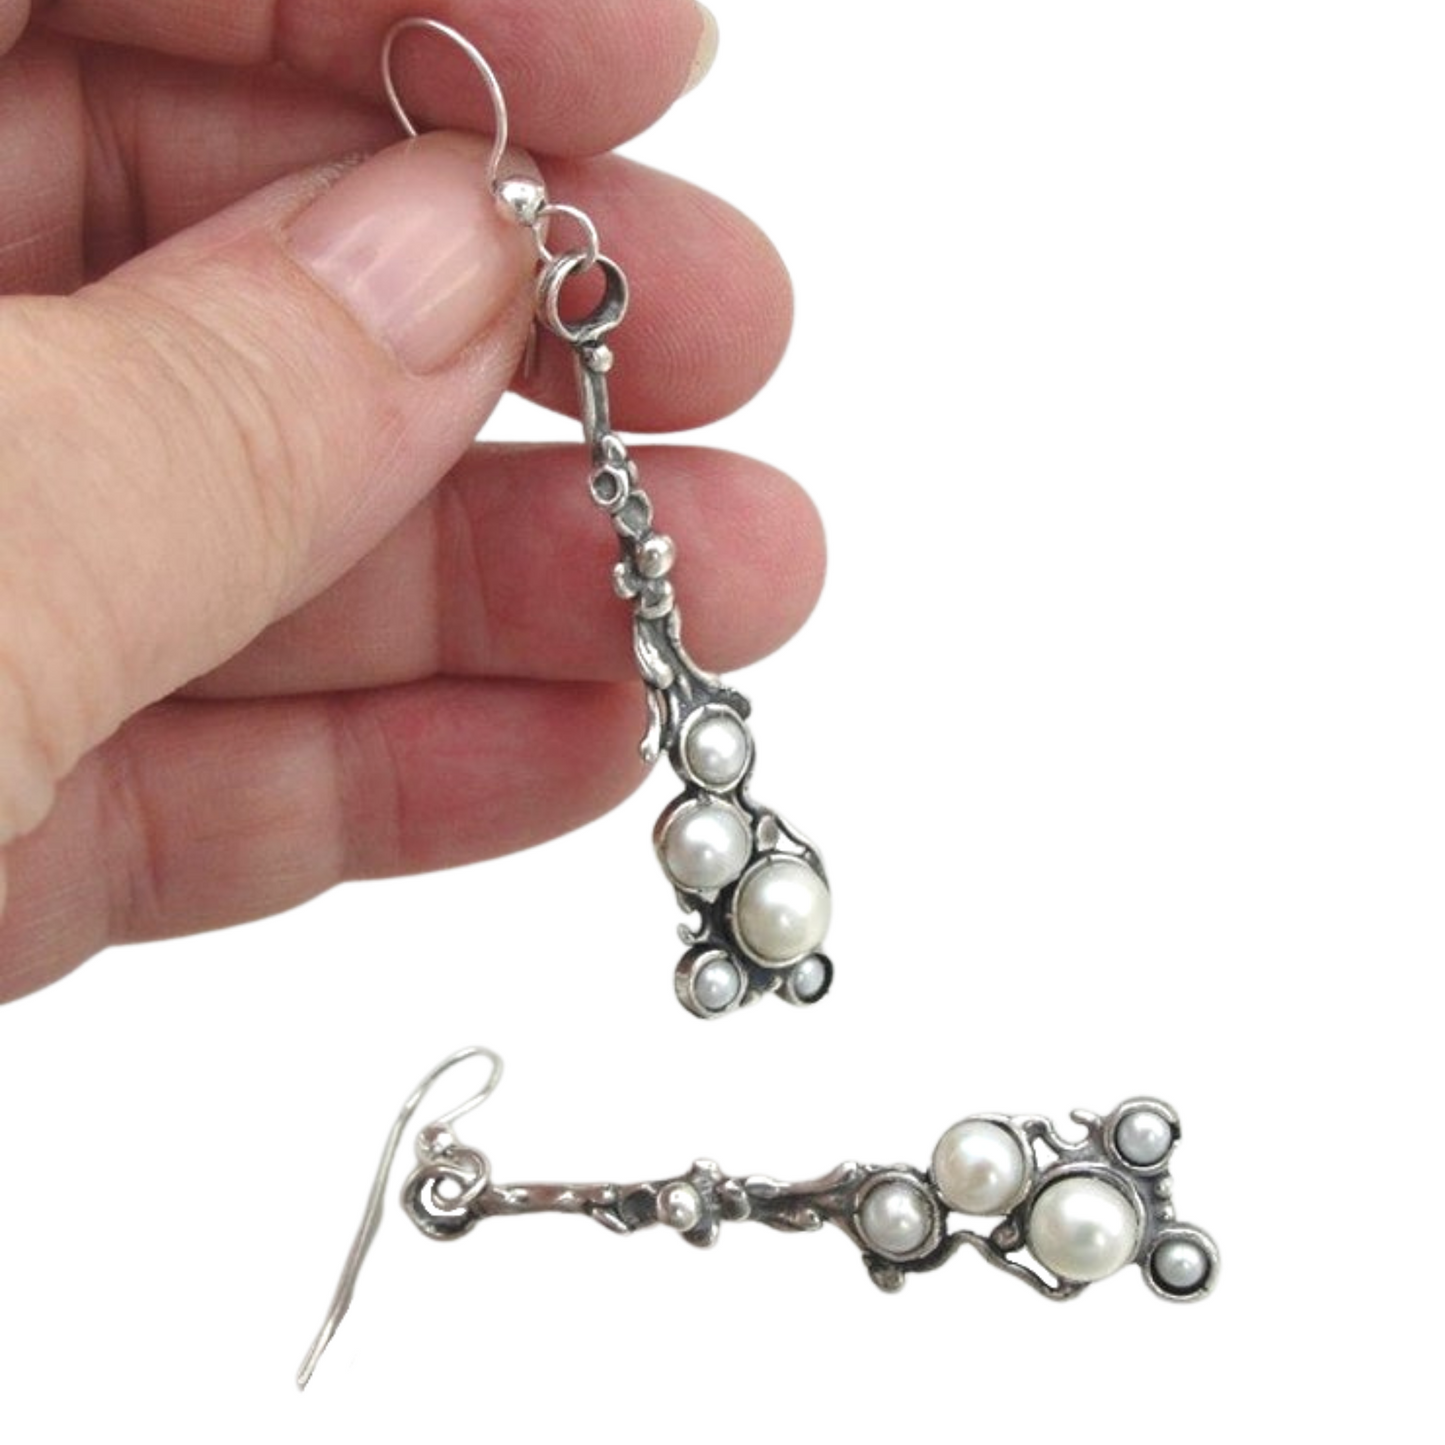 Long sterling silver earrings decorated with white natural pearls.